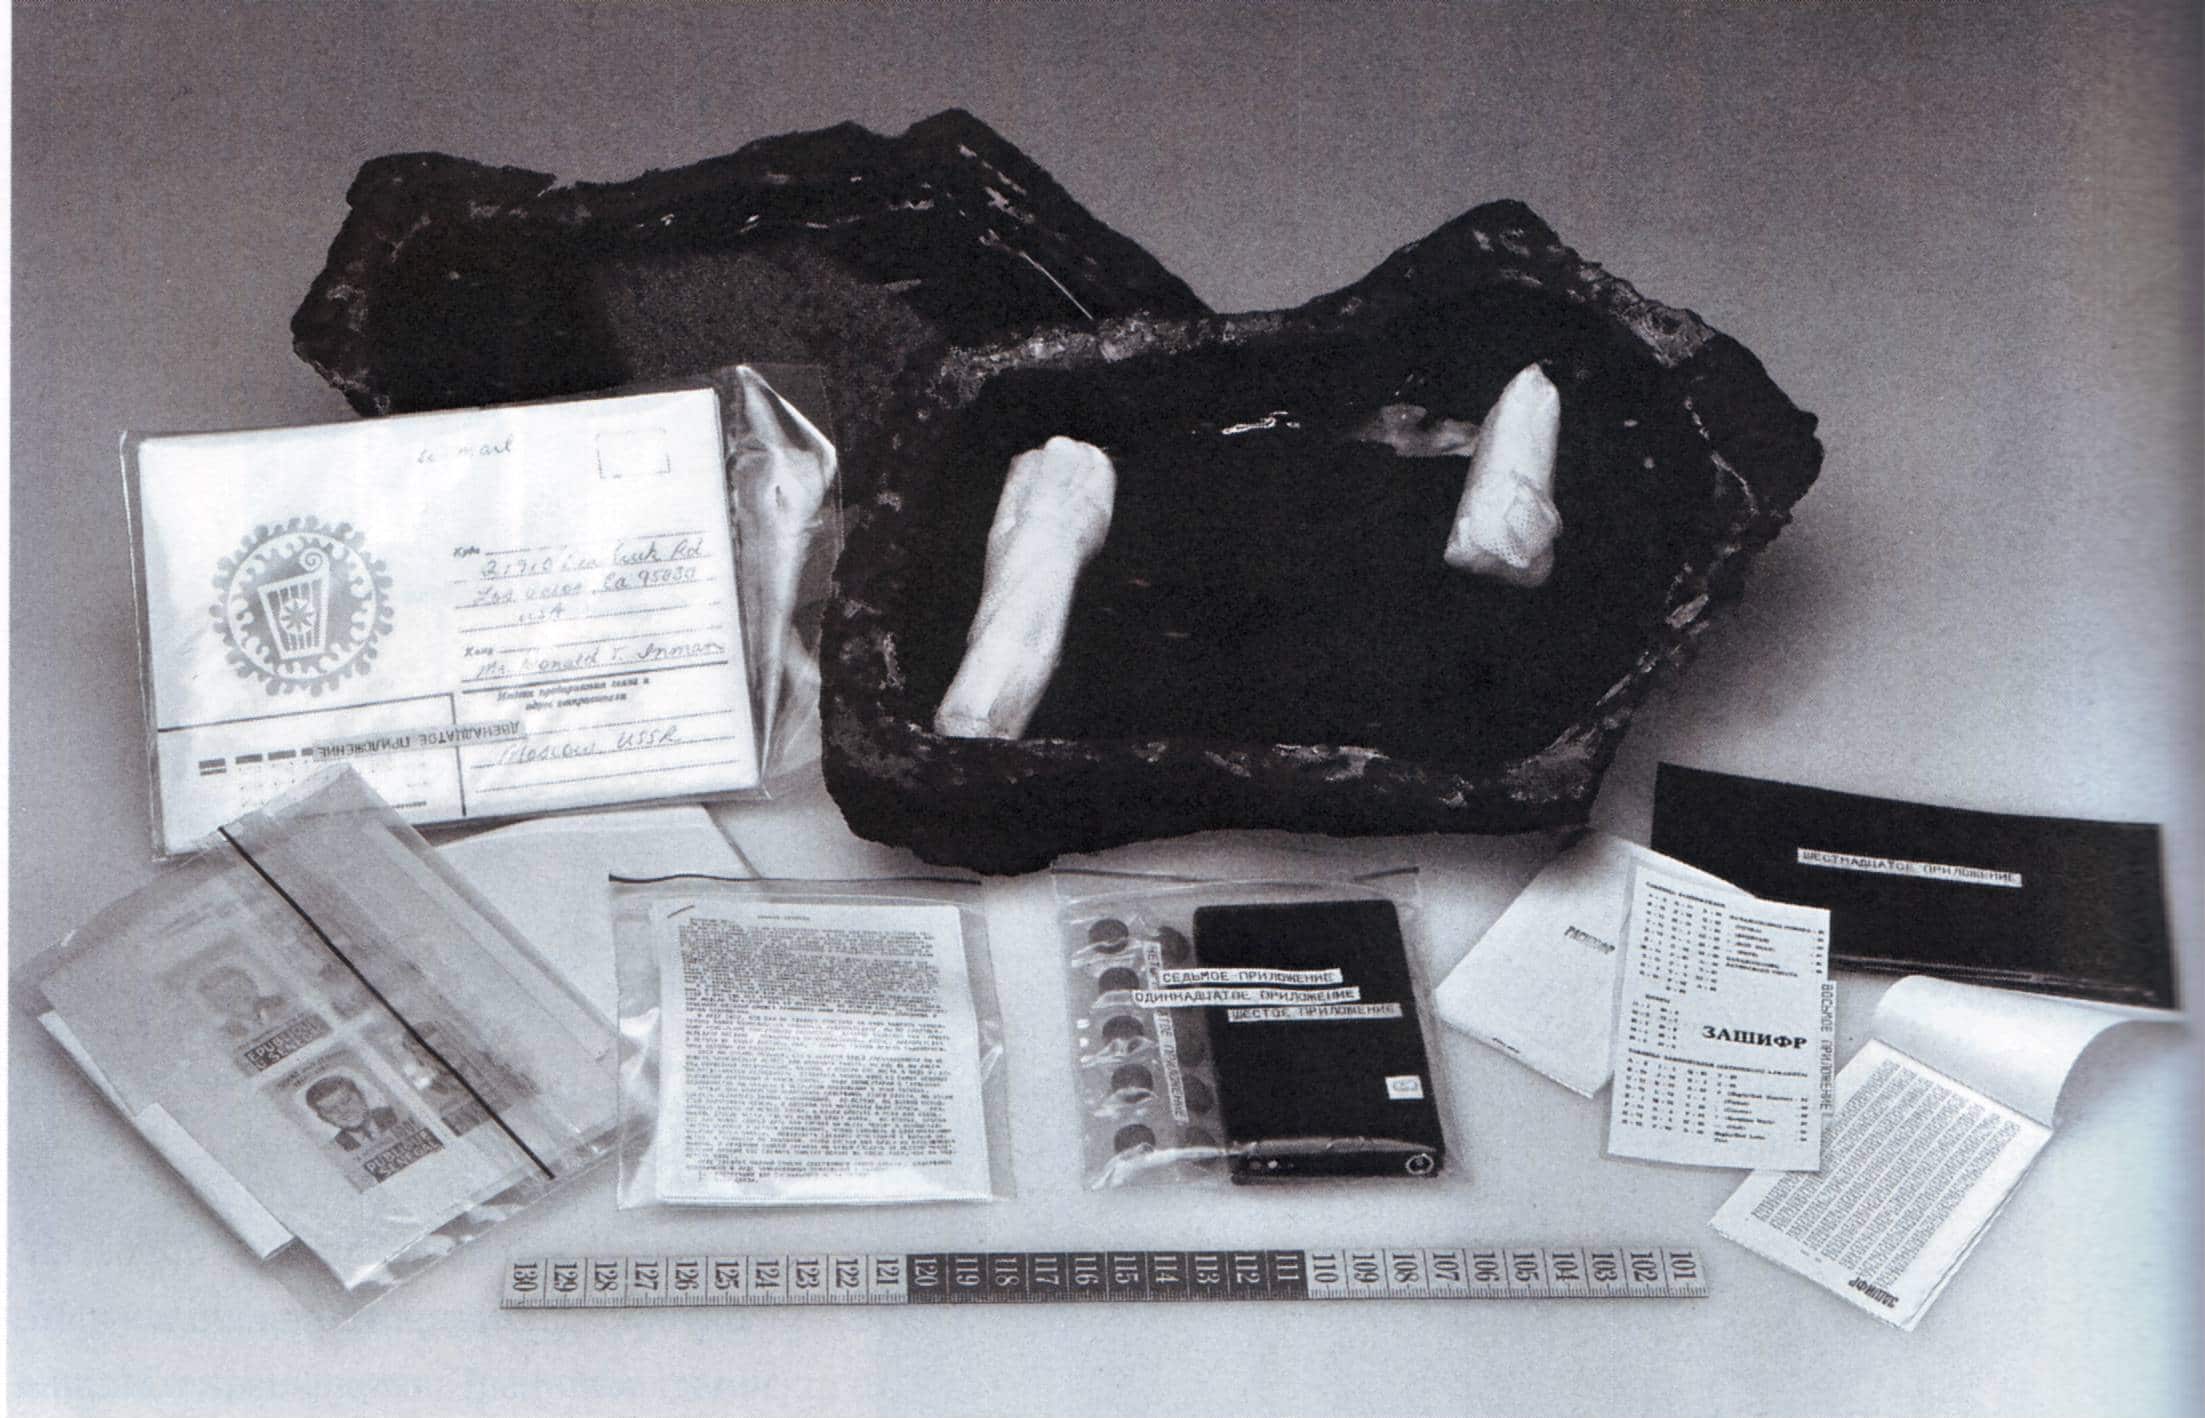 CIA equipment confiscated by KGB associated with the case  